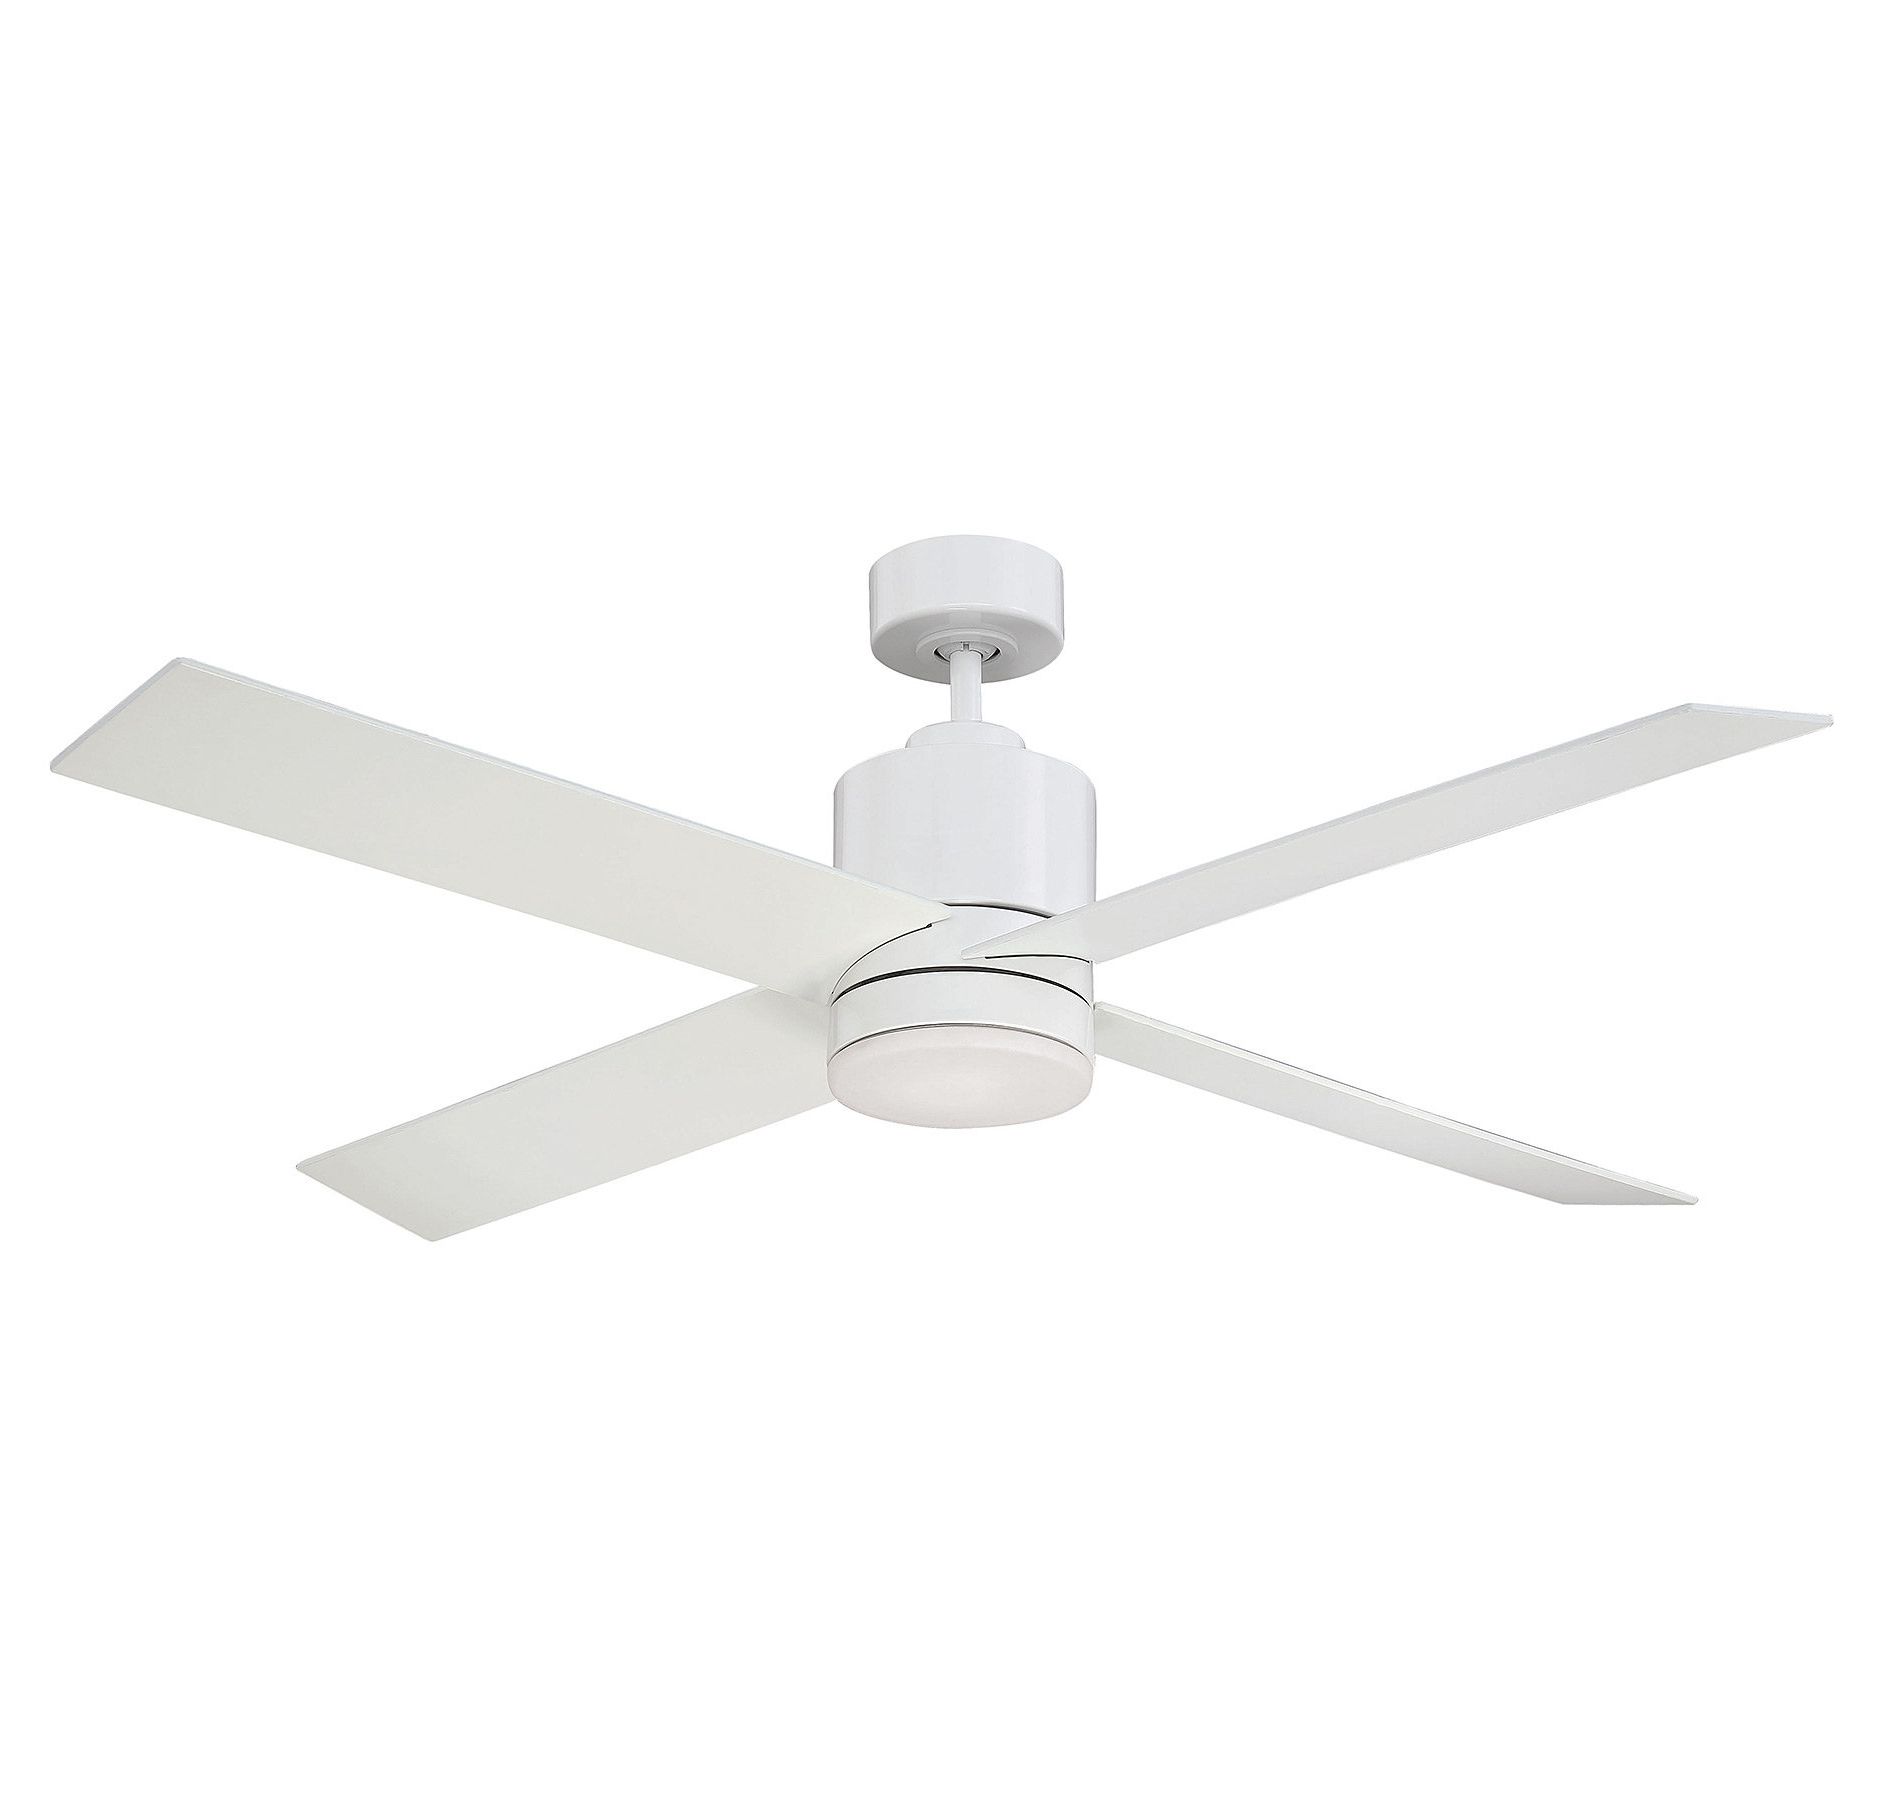 Famous 52" Rinke 4 Blade Ceiling Fan With Remote, Light Kit Included In Loki 4 Blade Led Ceiling Fans (View 12 of 20)